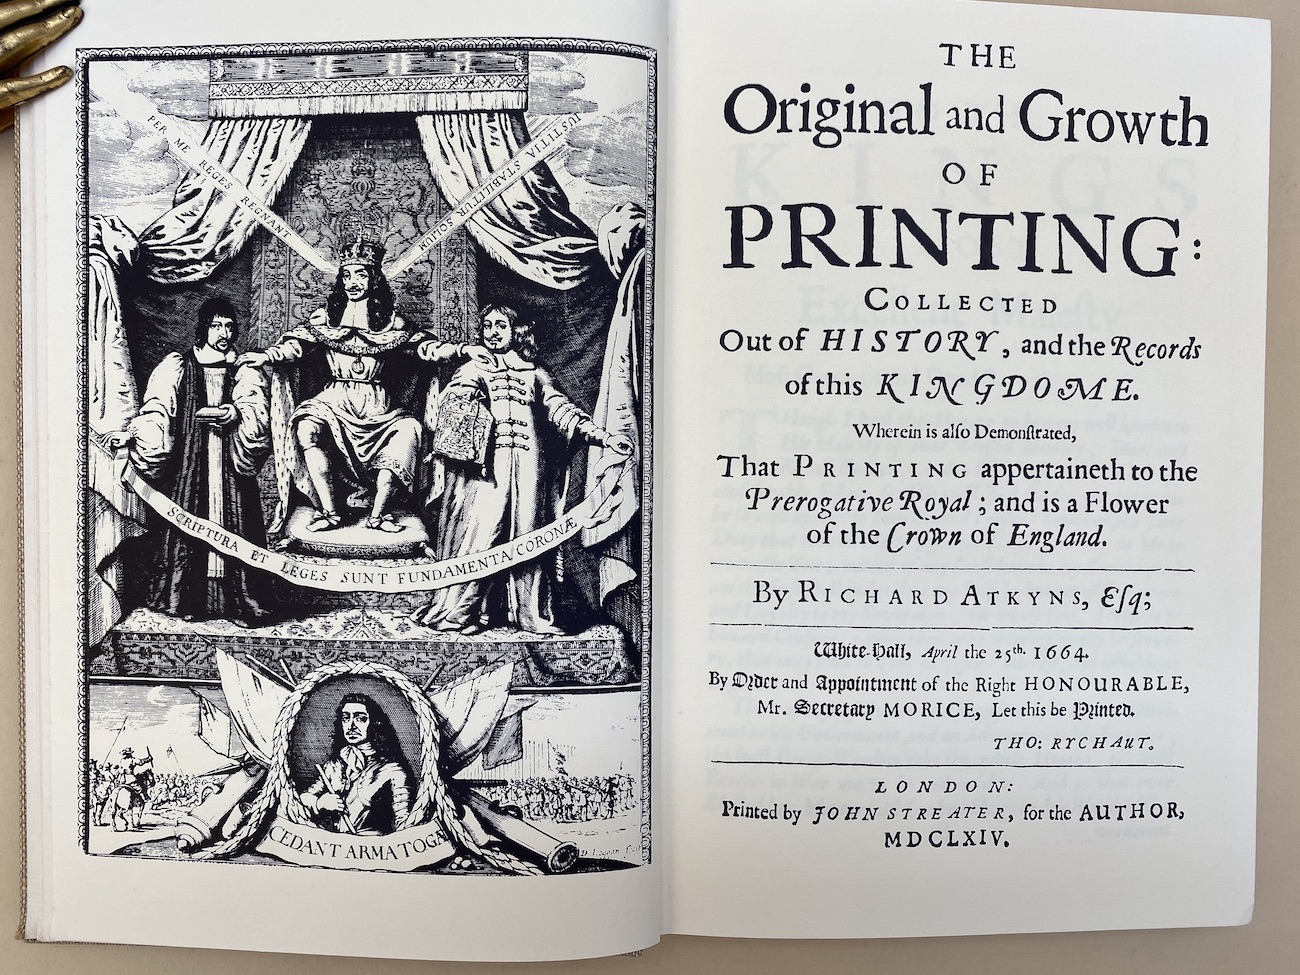 Title page and frontispiece of Atkyns's work reproduced from Bliss's reproduction.